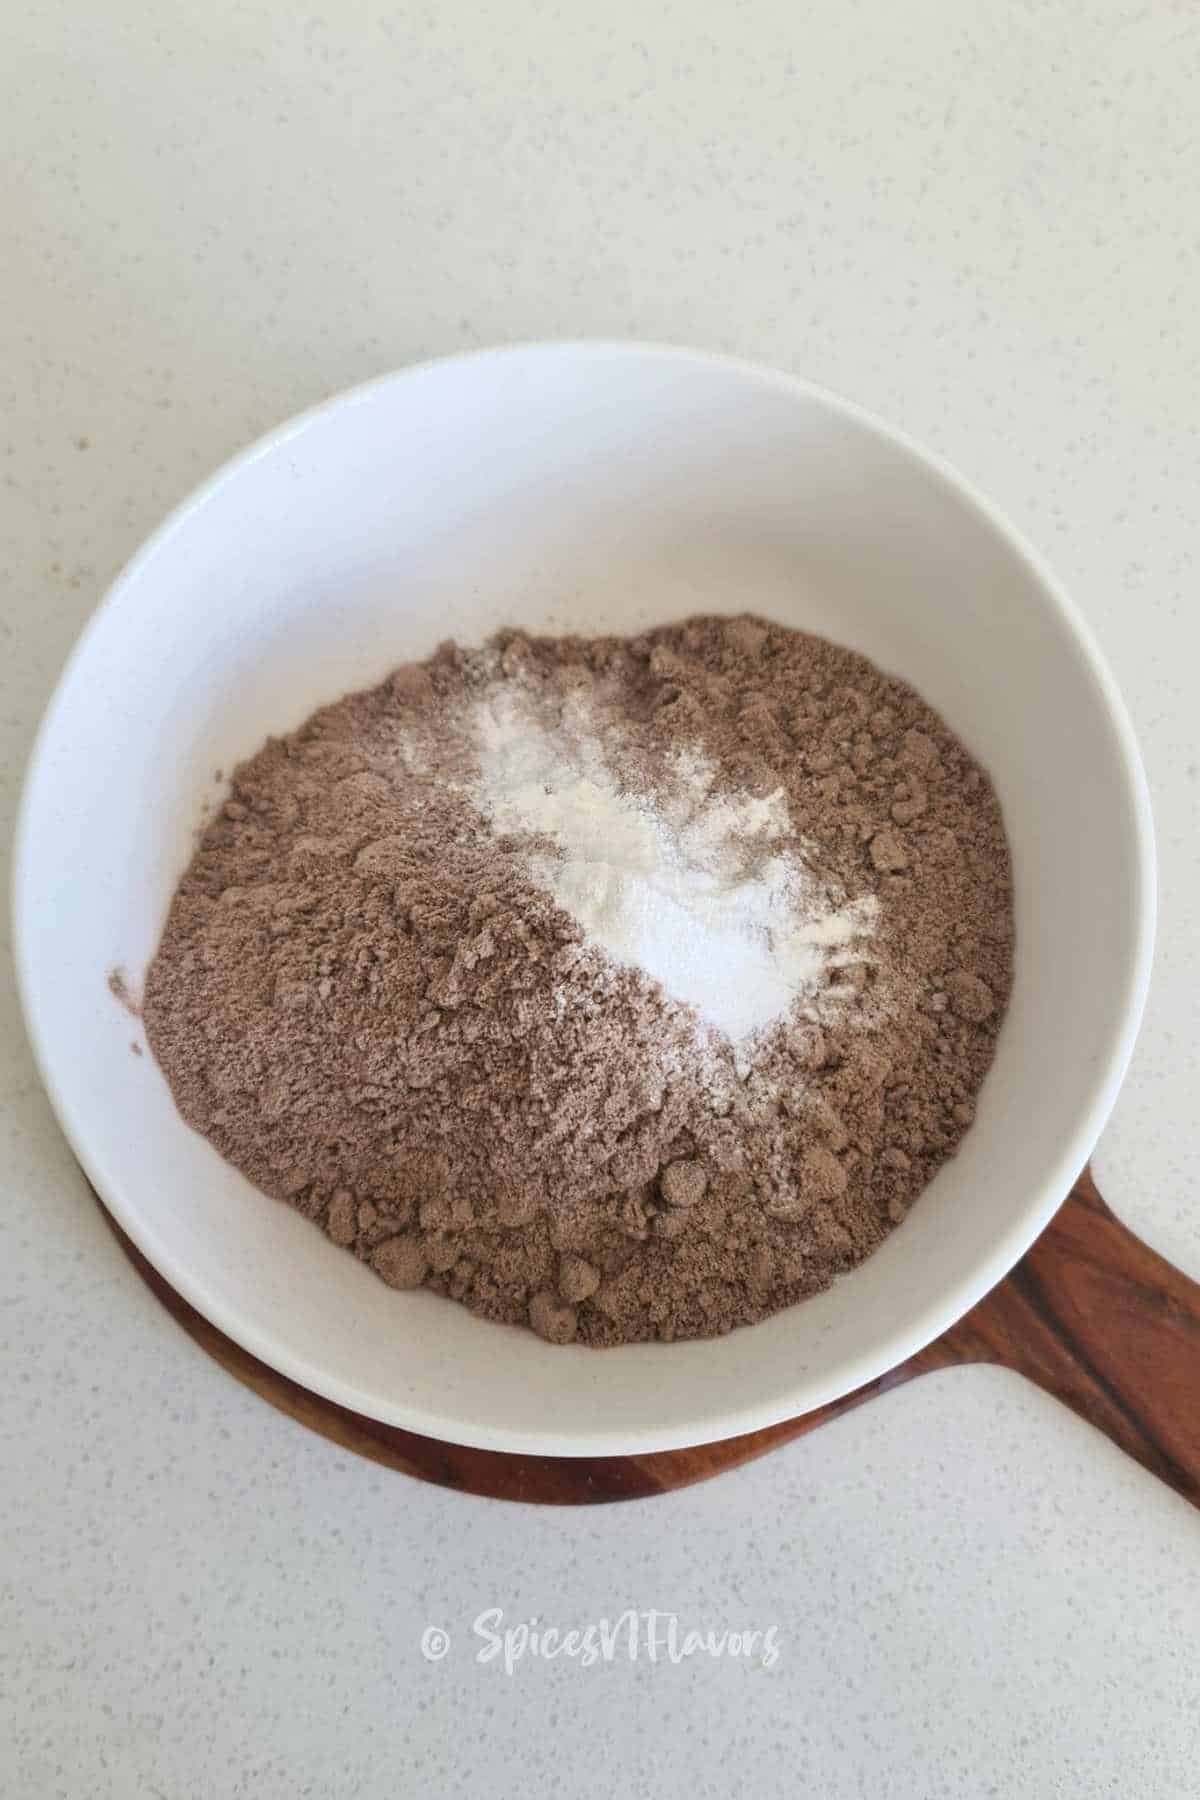 dry ingredients from brownie box emptied into white bowl